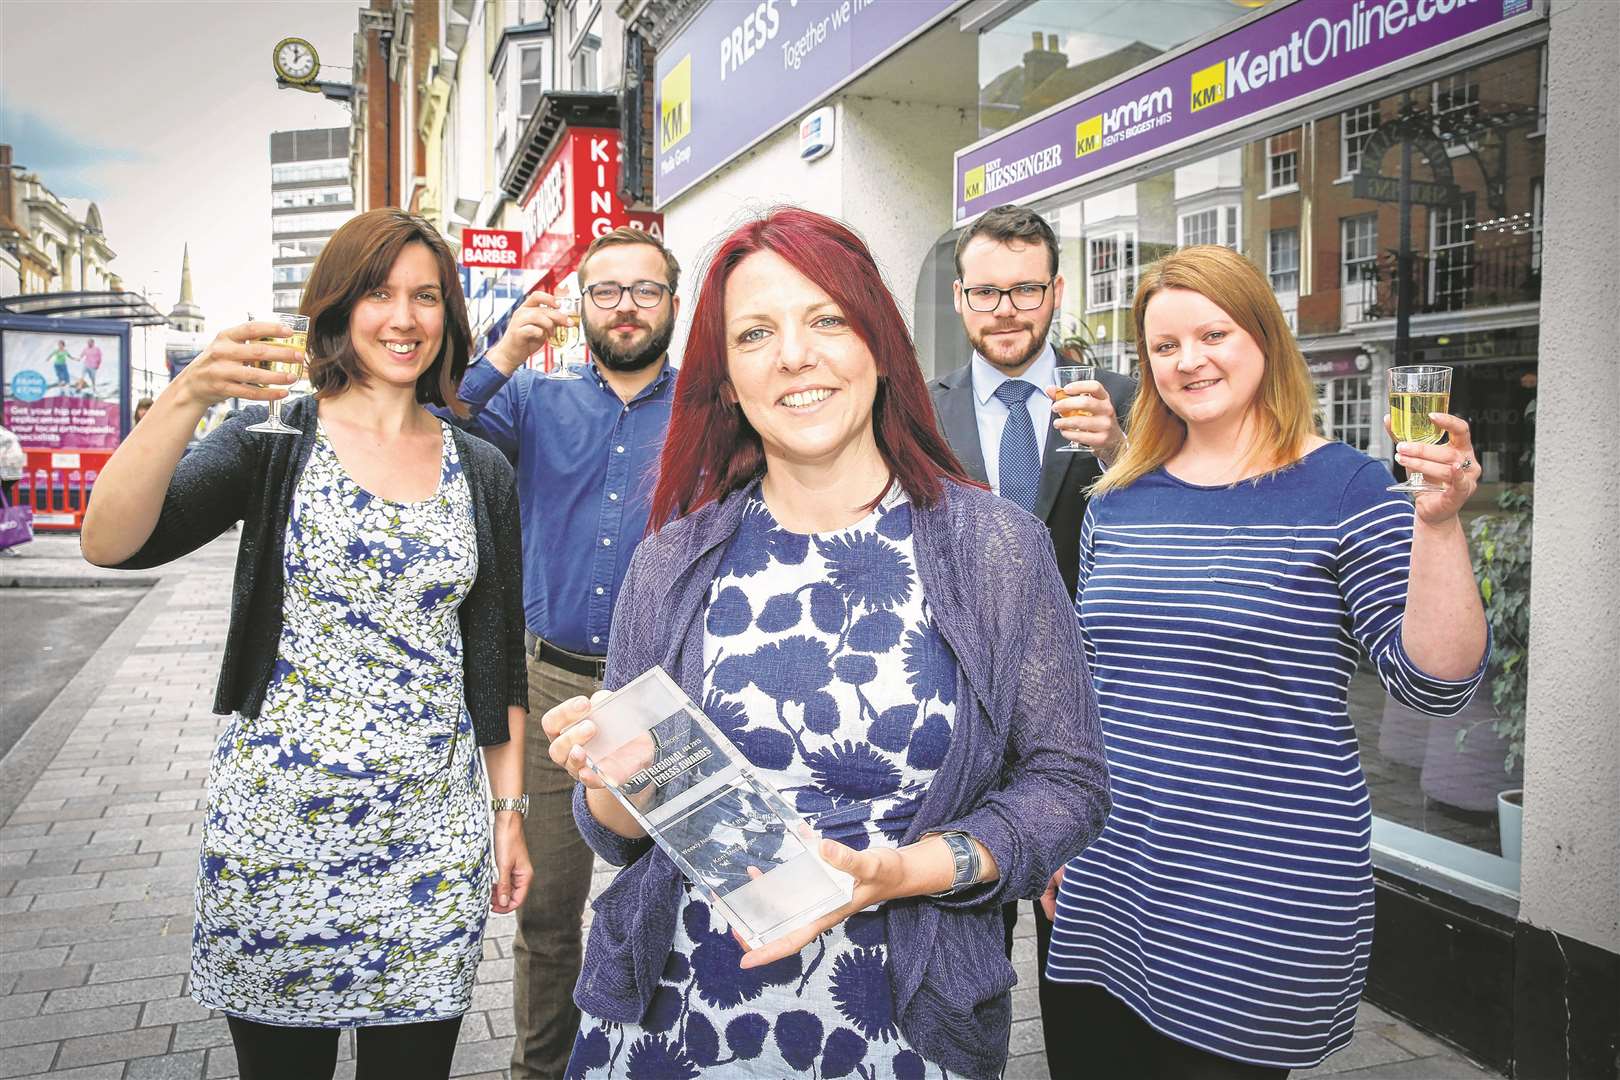 Kent Messenger editor Denise Eaton with editorial staff outside the KM offices in Maidstone with their Newspaper of the Year Award.